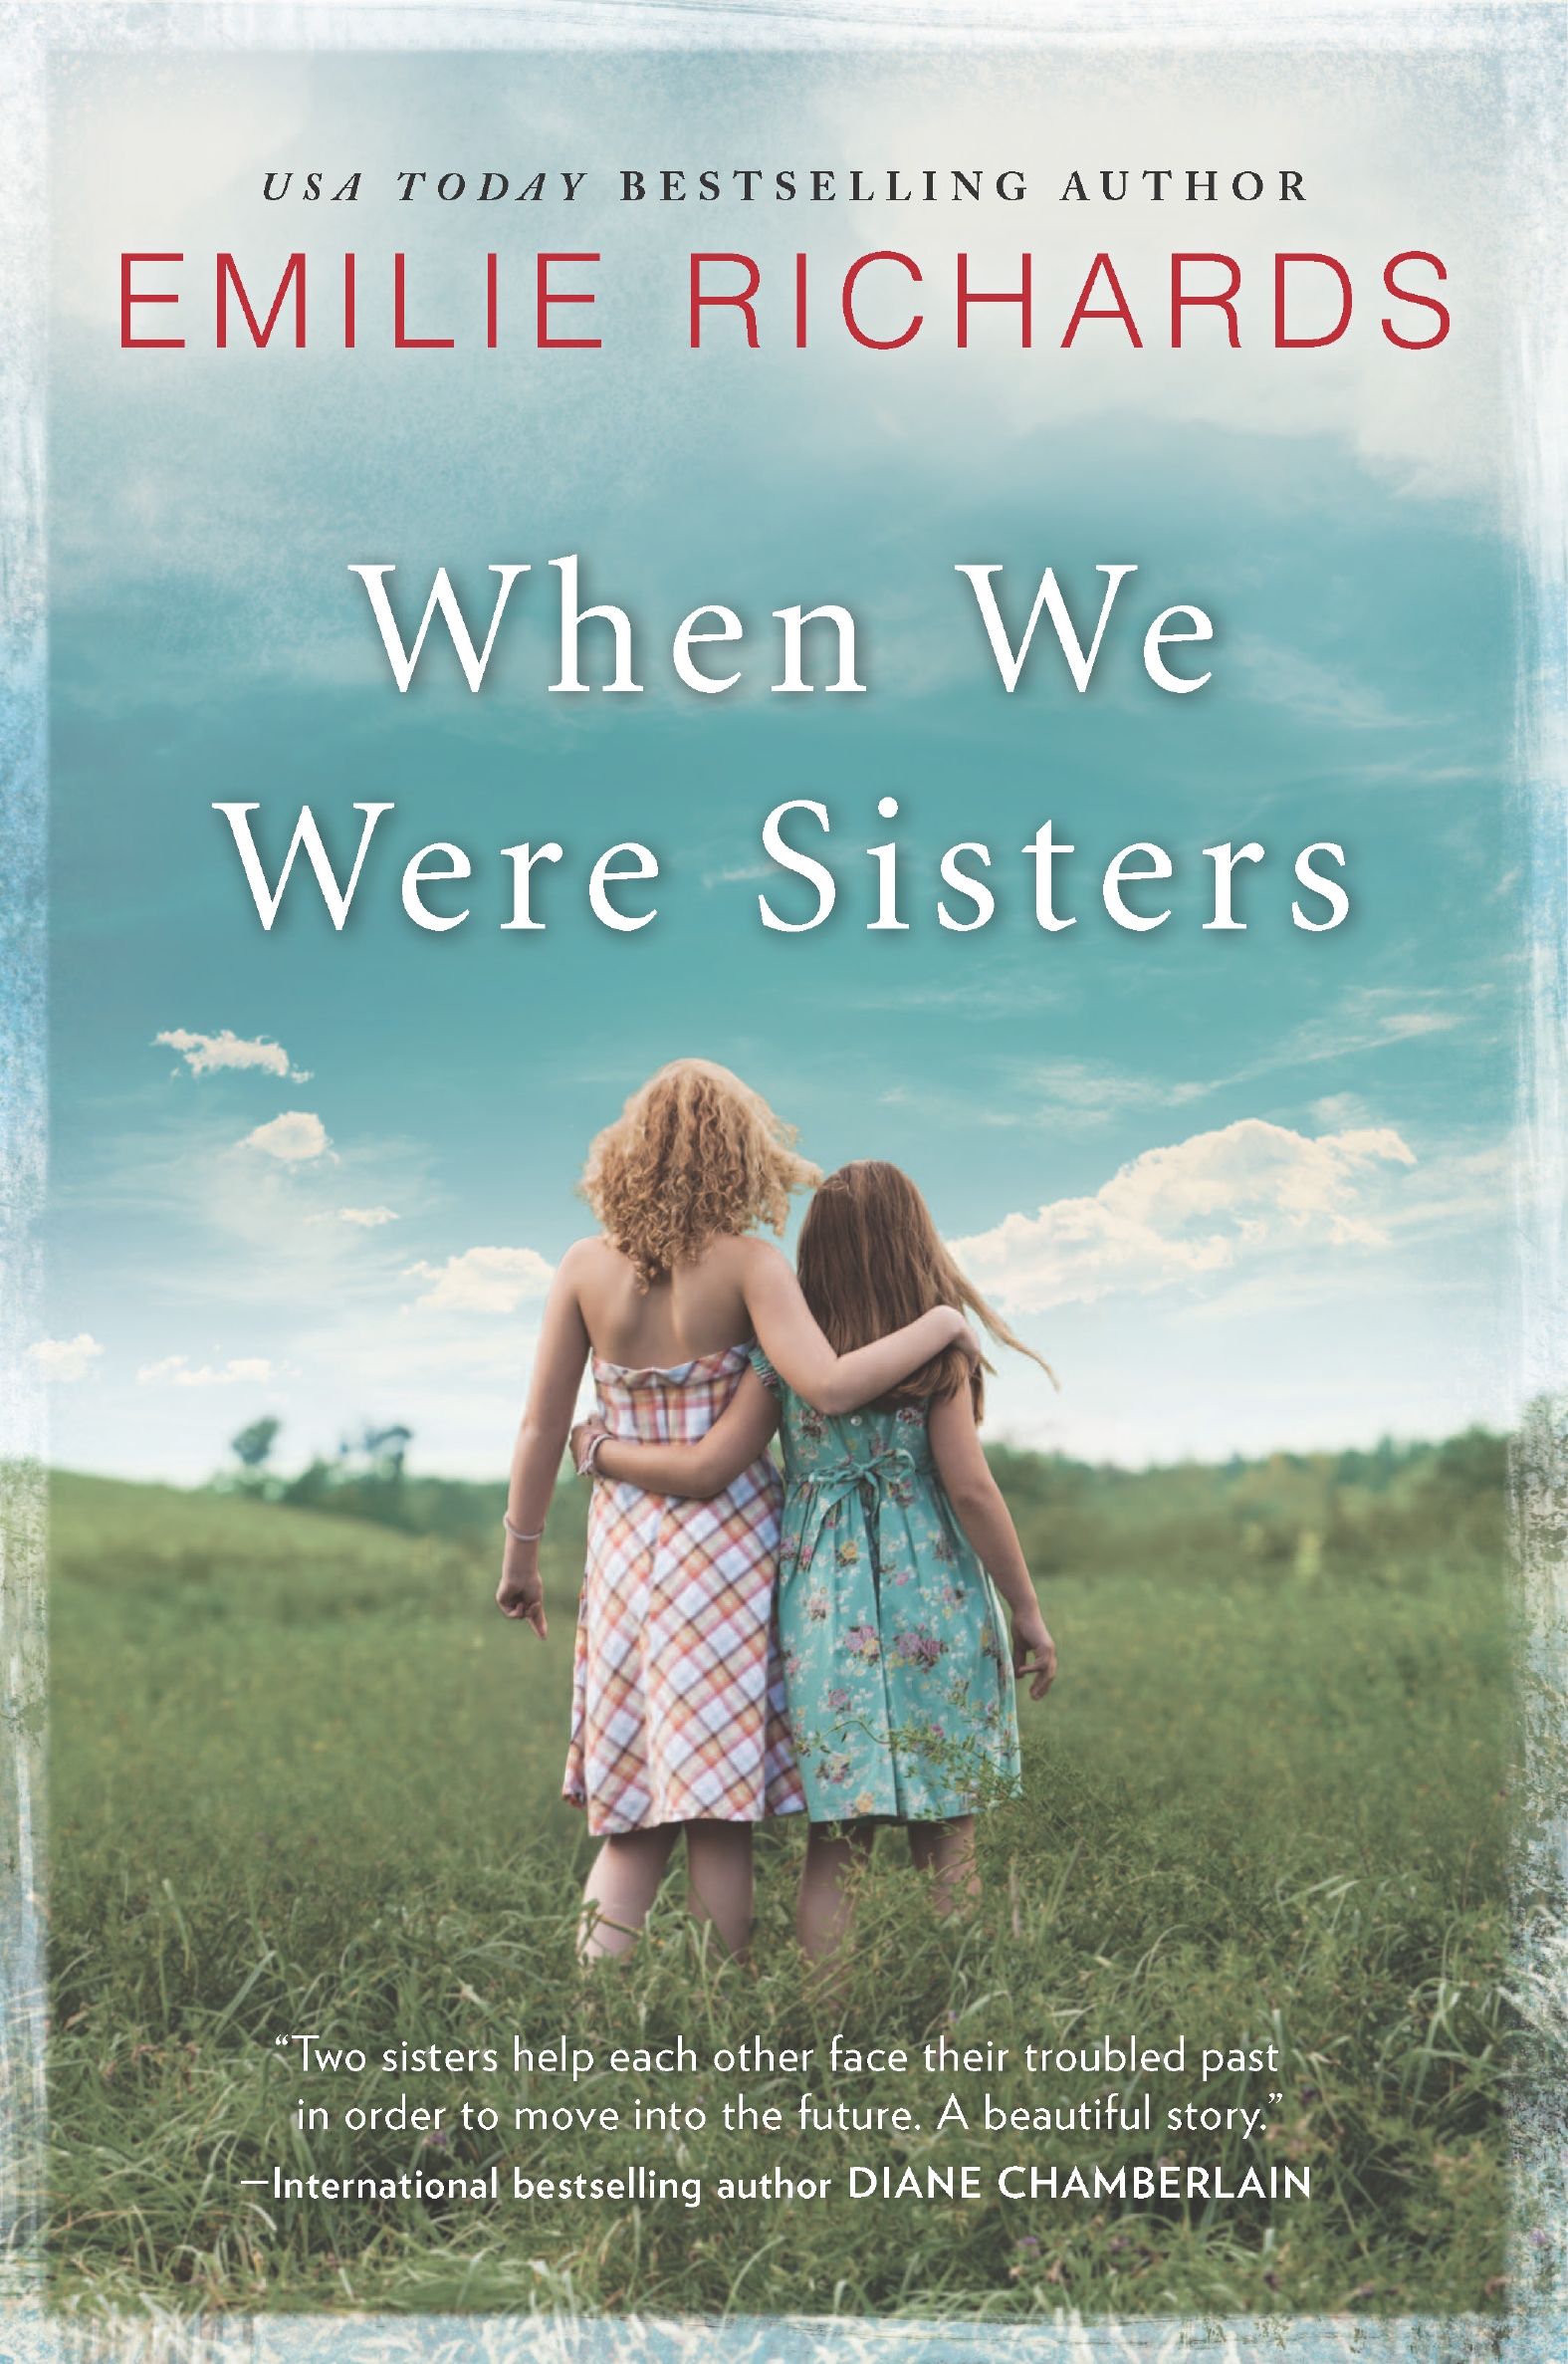 When We Were Sisters (2016) by Emilie Richards